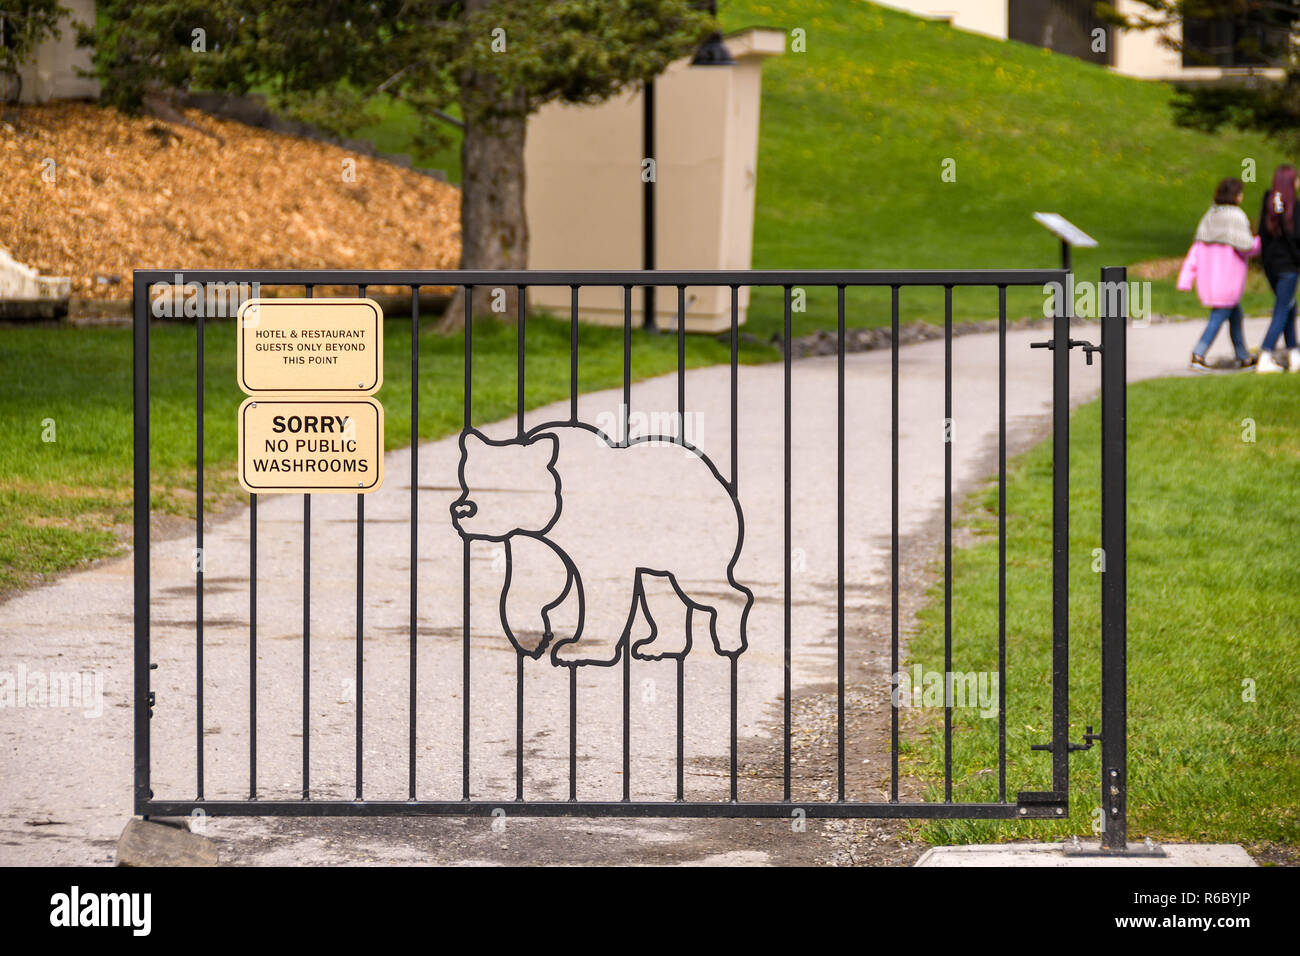 LAKE LOUISE, ALBERTA, CANADA - MAY 2018: Wrought iron gate outside the Fairmont Chateau Lake Louise hotel with a bear design Stock Photo